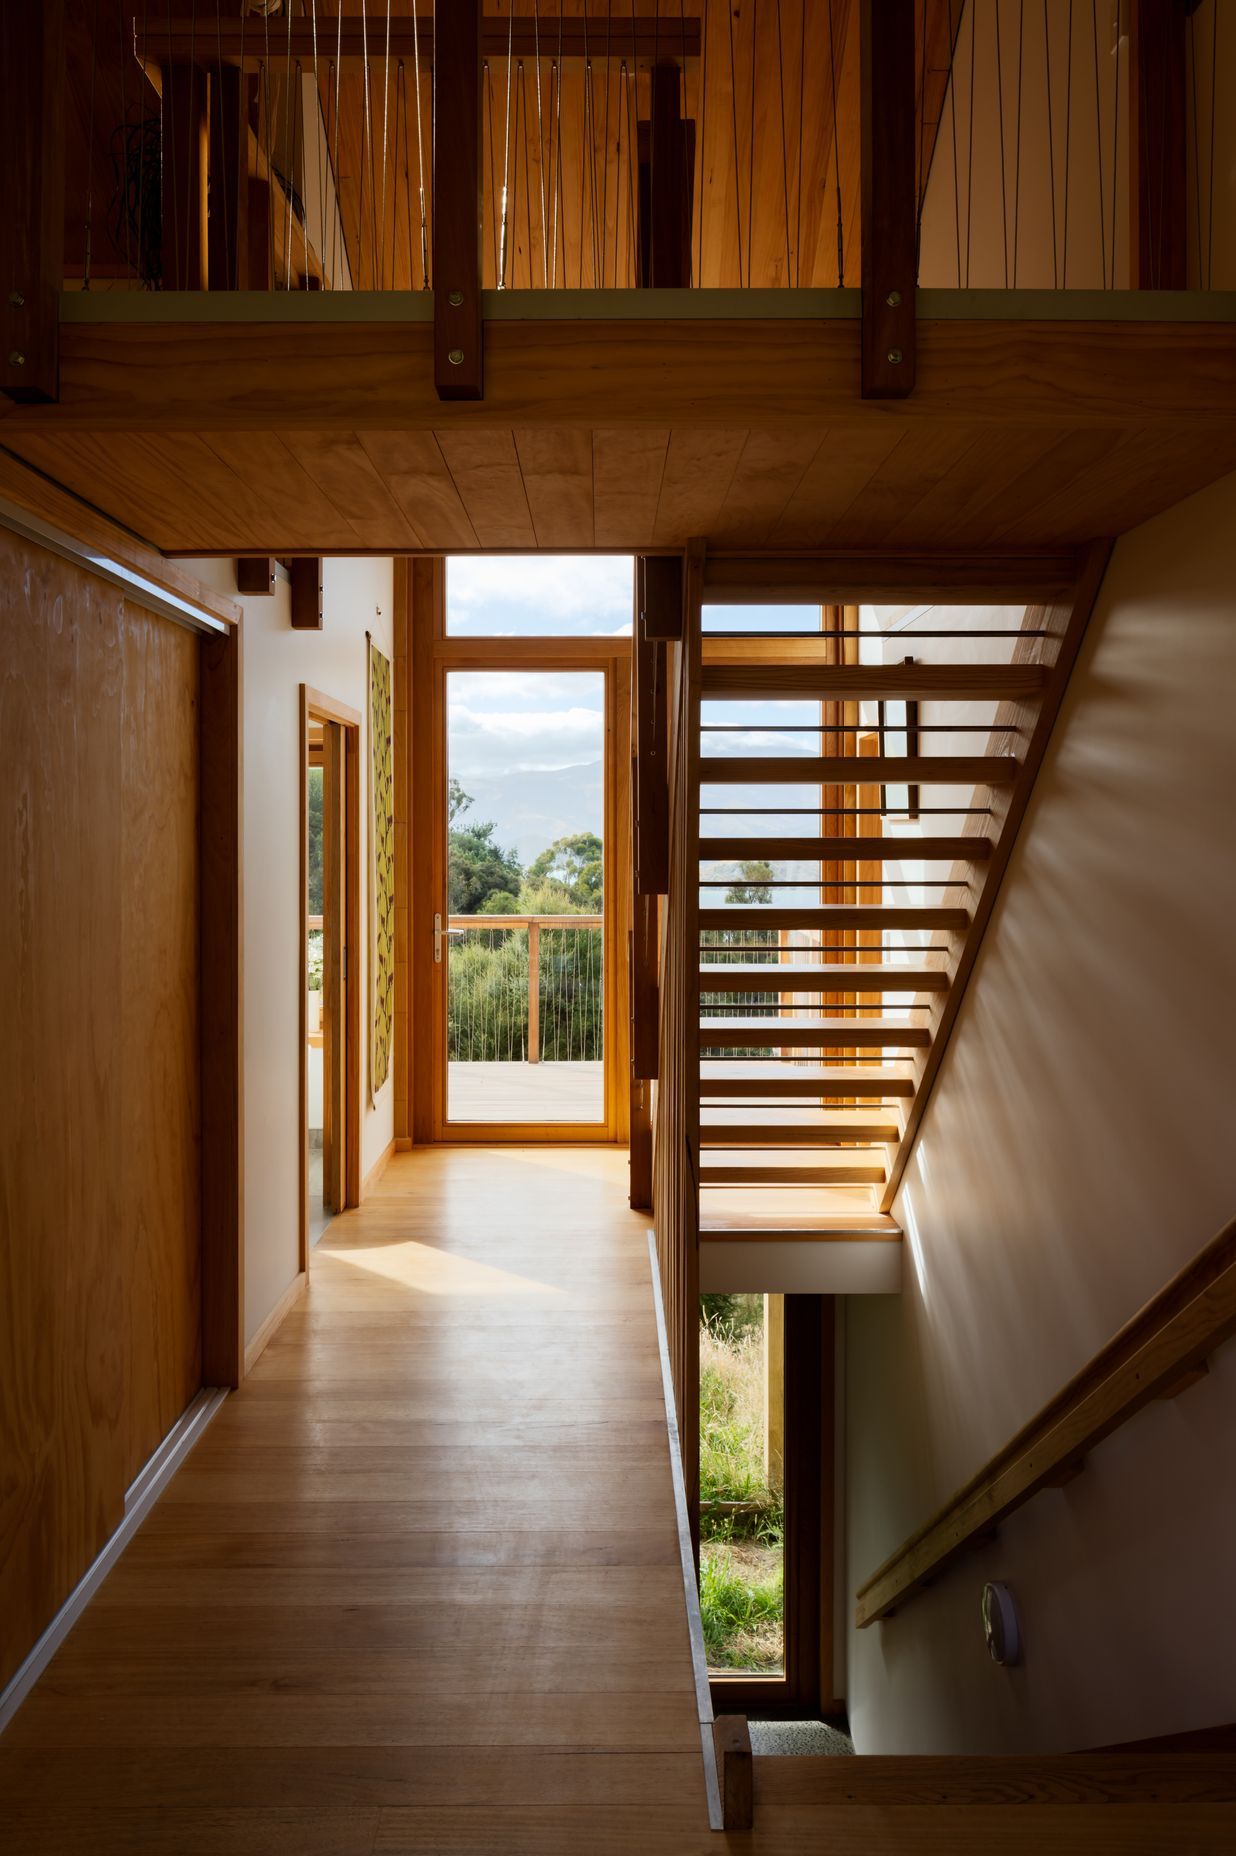 The timber staircase to the mezzanine adds to the house's overall sense of openness.